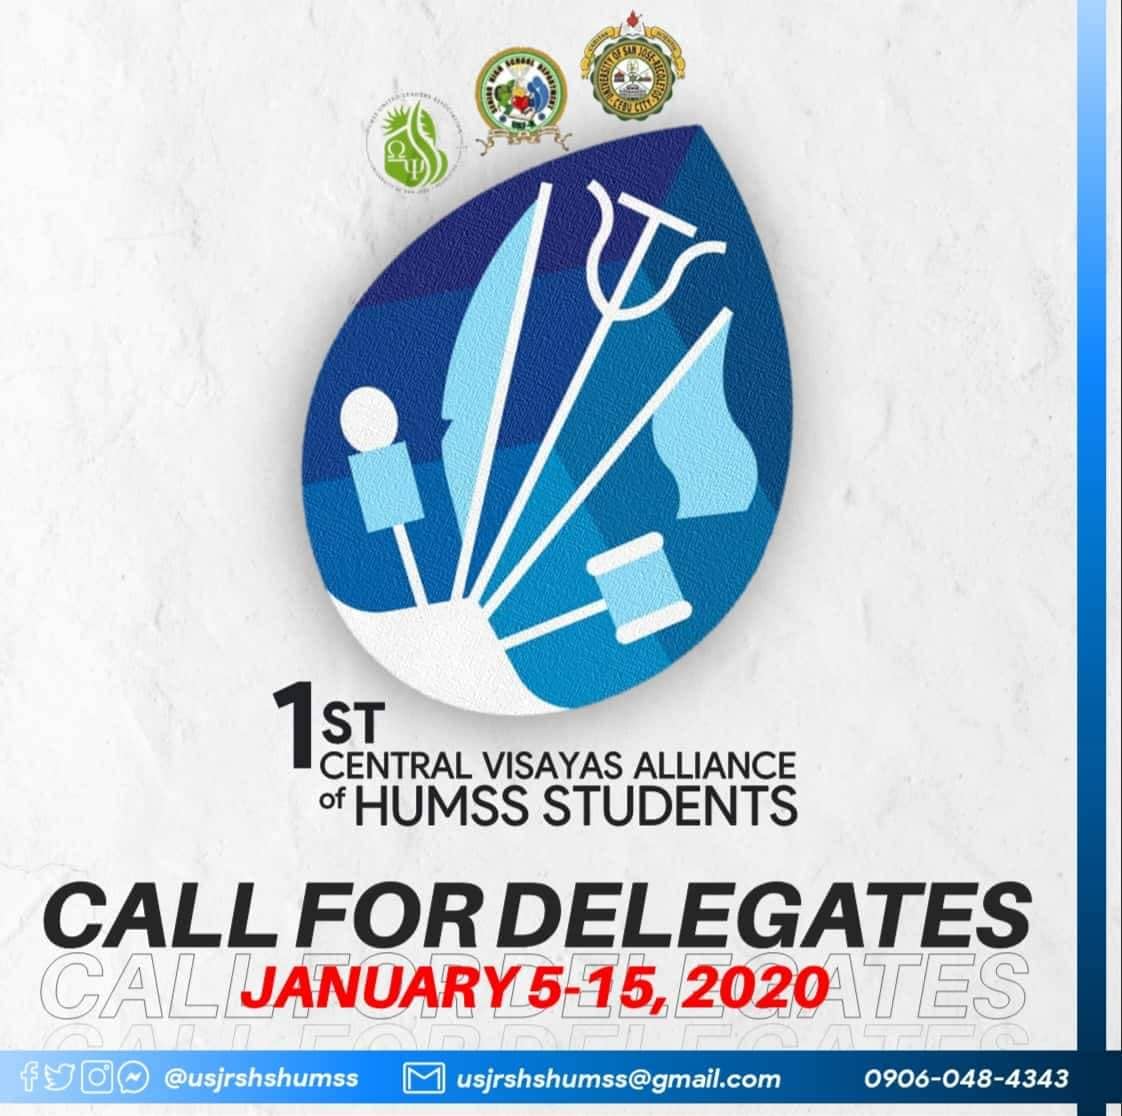 Pre-registration for 1st Central Visayas Alliance of HUMSS students now open